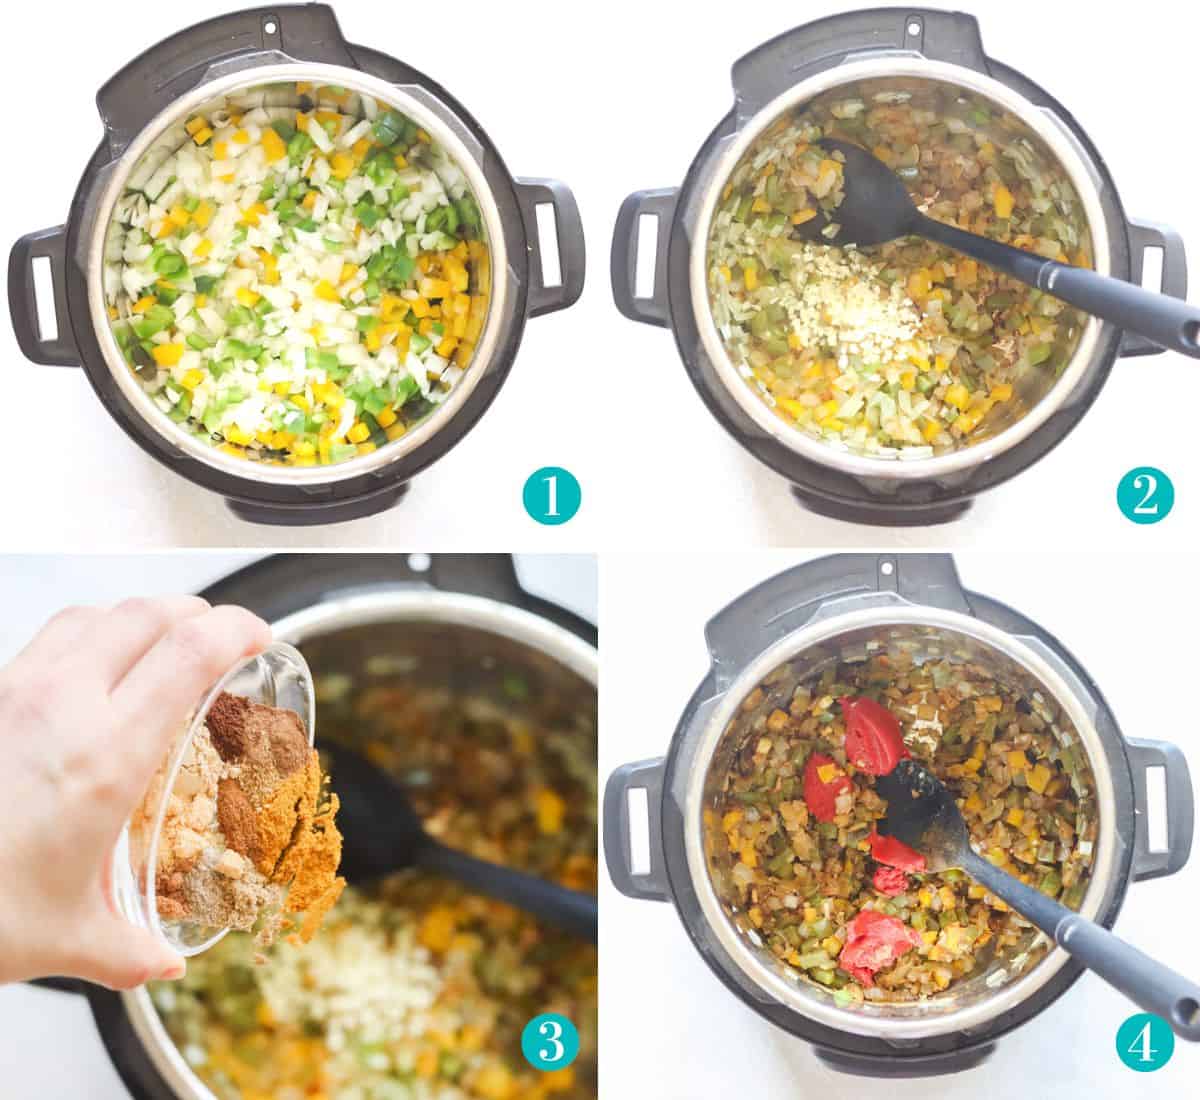 four photo collage with veggies sauteeing in instant pot, garlic added to cooked veggies with a black spoon, hand adding spices to the veggies in the instant pot, and tomato paste added to cooked veggies in an instant pot.